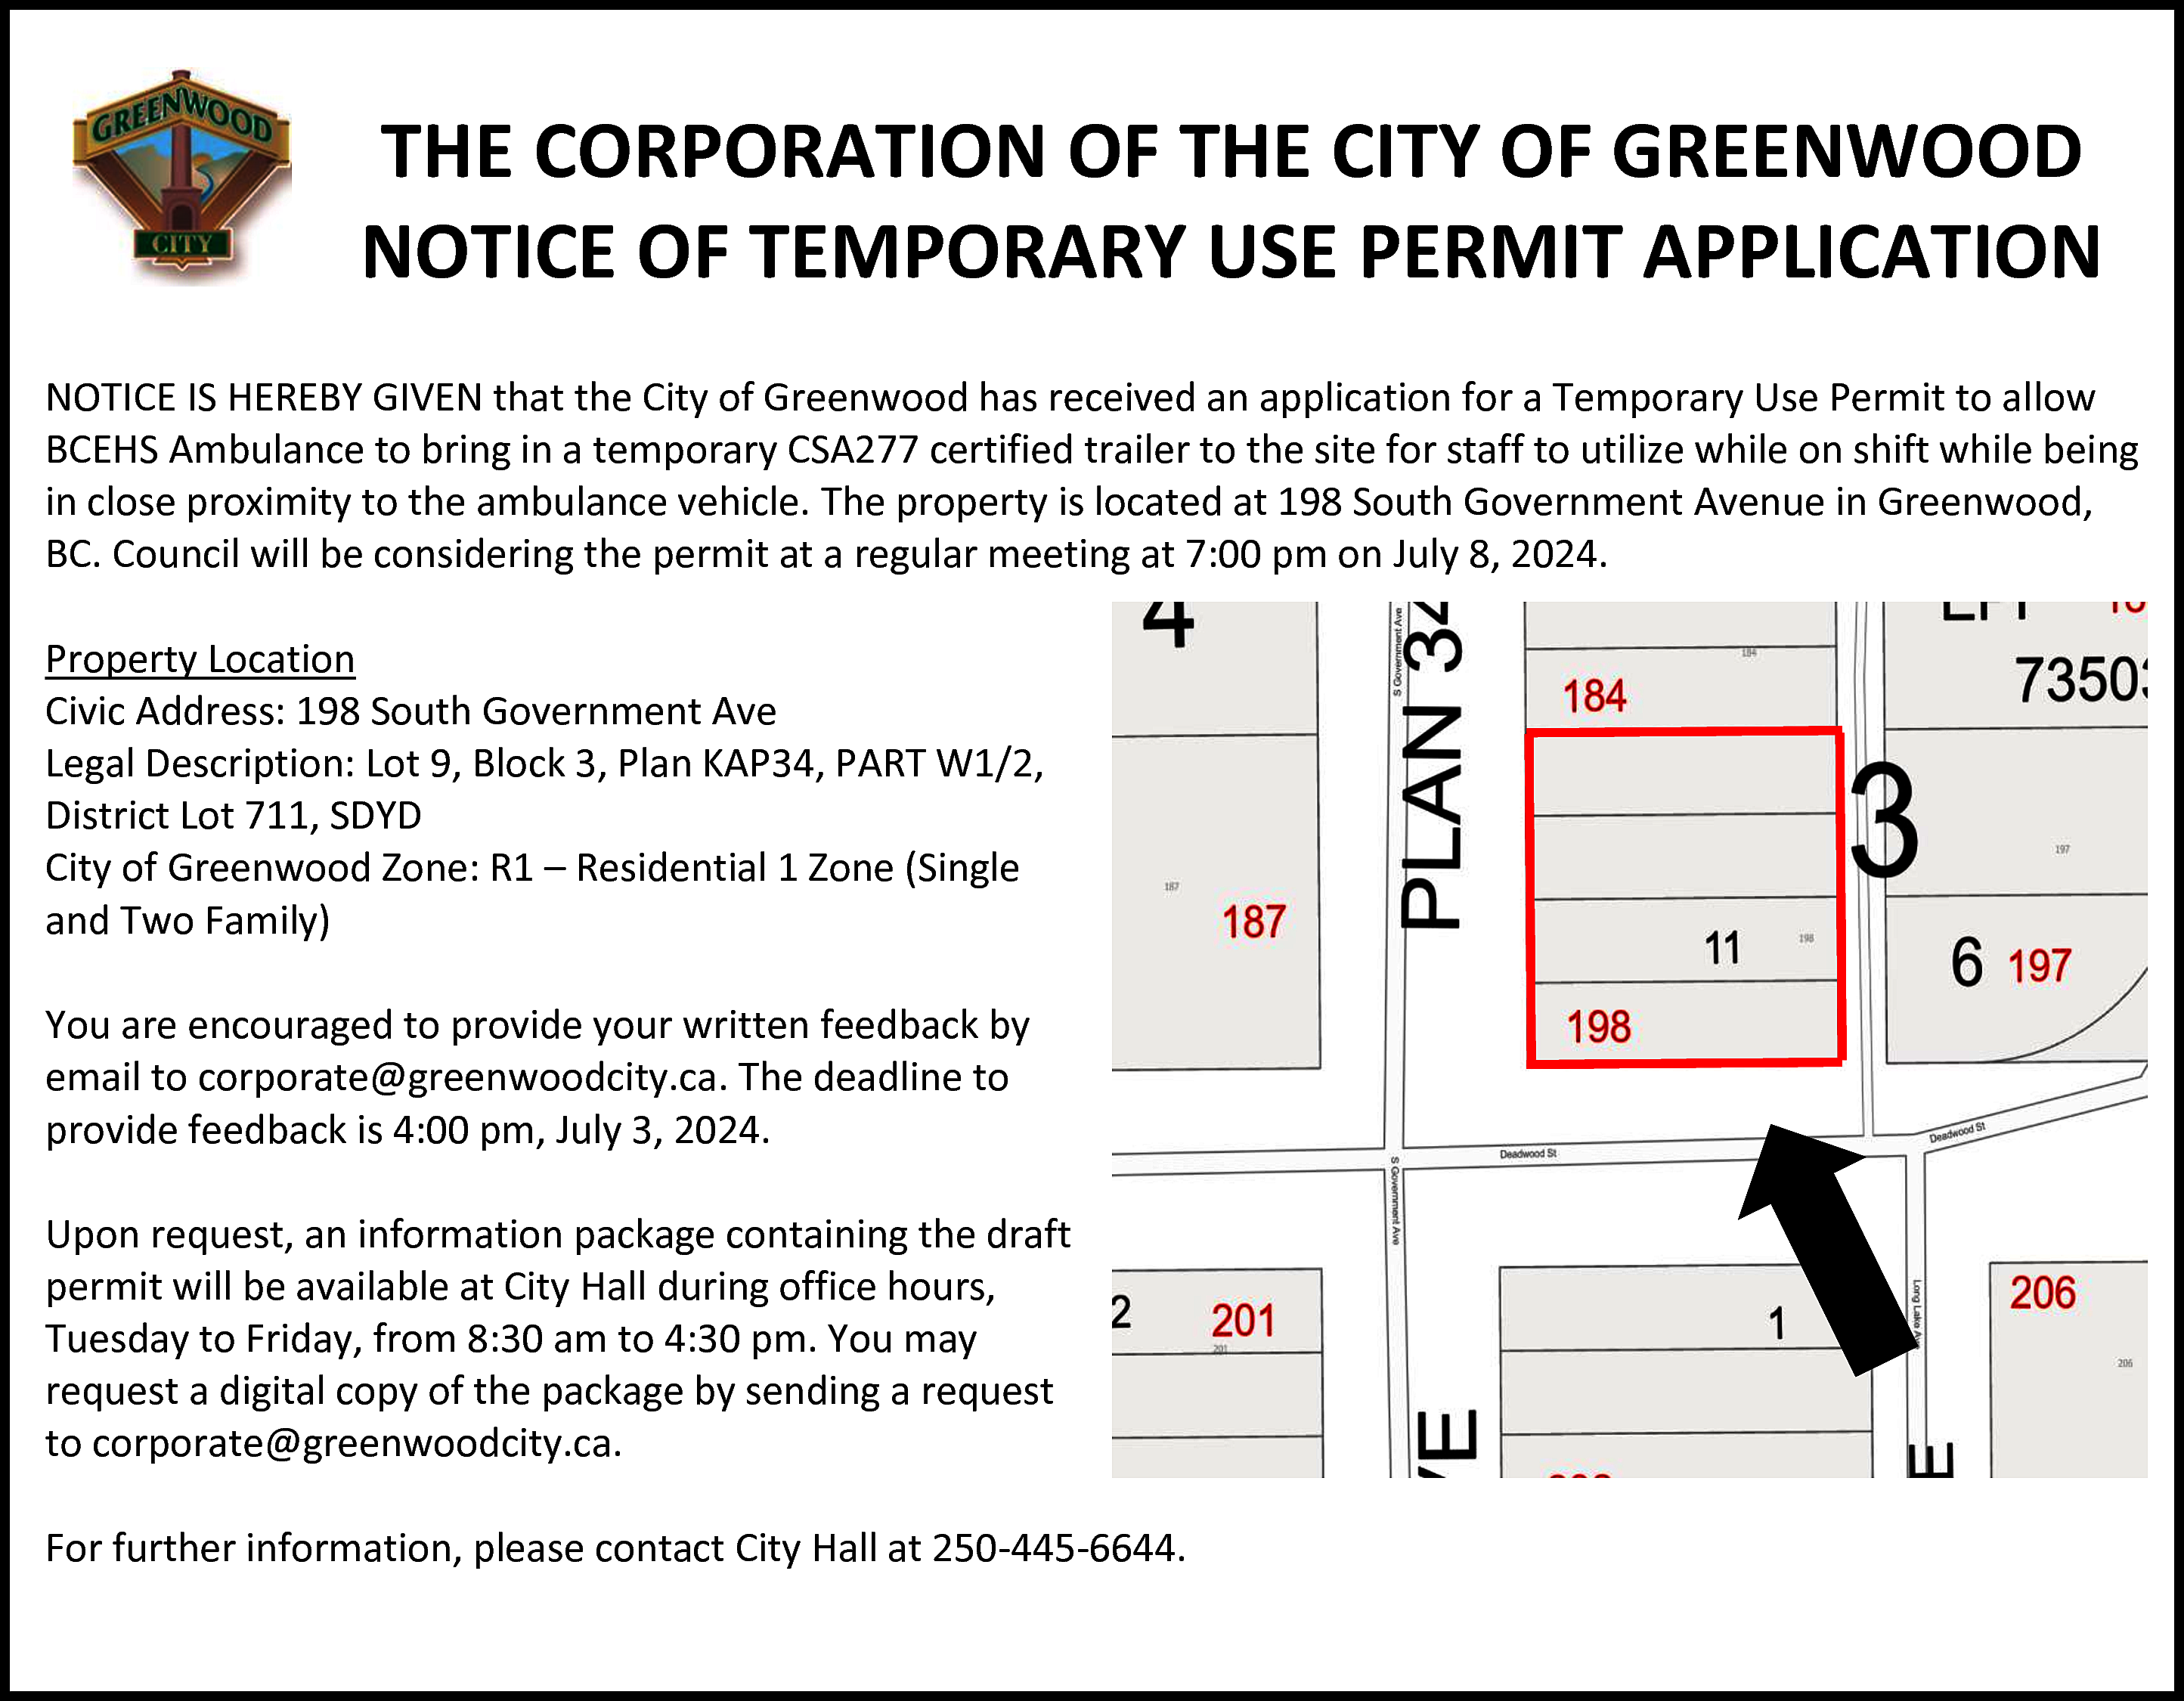 THE CORPORATION OF THE CITY  THE CORPORATION OF THE CITY OF GREENWOOD  NOTICE  OF TEMPORARY  USECITY  PERMIT  APPLICATION  THE CORPORATION  OF THE  OF GREENWOOD  NOTICE OF TEMPORARY USE PERMIT APPLICATION    THE CORPORATION OF THE CITY OF GREENWOOD  NOTICE OF TEMPORARY USE PERMIT APPLICATION    NOTICE IS HEREBY GIVEN that the City of Greenwood has received an application for a Temporary Use Permit to allow  BCEHS Ambulance to bring in a temporary CSA277 certified trailer to the site for staff to utilize while on shift while being  NOTICE IS HEREBY GIVEN that the City of Greenwood has received an application for a Temporary Use Permit to allow  in close proximity to the ambulance vehicle. The property is located at 198 South Government Avenue in Greenwood,  BCEHS  Ambulance  bring in a temporary  certified  trailer  to the  to utilize while on shift while being  BC. Council  will betoconsidering  the permit CSA277  at a regular  meeting  at 7:00  pmsite  on for  Julystaff  8, 2024.  in close proximity to the ambulance vehicle. The property is located at 198 South Government Avenue in Greenwood,  BC.  CouncilLocation  will be considering the permit at a regular meeting at 7:00 pm on July 8, 2024.  Property    hat the City of Greenwood has received an application for a Temporary U  Address: 198 South Government Ave  inProperty  aCivic  temporary  certified trailer to the site for staff to utilize whil  Location Lot 9,CSA277  Legal Description:  Block 3, Plan KAP34, PART W1/2,  Civic  Address:  198  South  Government  Ave  District Lot 711,  SDYD  mbulance  vehicle.  ThePlan  property  is located at 198 South Government Aven  Legal  LotZone:  9, Block  KAP34,  PART(Single  W1/2,  City Description:  of Greenwood  R1 –3,Residential  1 Zone  District  Lot  711,  SDYD  and  Two permit  Family)  ing  the  at a regular meeting at 7:00 pm on July 8, 2024.  City of Greenwood Zone: R1 – Residential 1 Zone (Single  and  YouTwo  are Family)  encouraged to provide your written feedback by  email to corporate@greenwoodcity.ca. The deadline to  You  are encouraged  provide  your  provide  feedback isto  4:00  pm, July  3, written  2024. feedback by  email to corporate@greenwoodcity.ca. The deadline to  provide  feedbackanisinformation  4:00 pm, July  3, 2024.  Upon request,  package  containing the draft  permit will be available at City Hall during office hours,  Upon  request,  an information  package  containing  the draft  Tuesday  to Friday,  from 8:30 am  to 4:30  pm. You may  permit  willa be  available  atthe  Citypackage  Hall during  office hours,  request  digital  copy of  by sending  a request  Tuesday  to Friday, from 8:30 am to 4:30 pm. You may  to corporate@greenwoodcity.ca.  request a digital copy of the package by sending a request  further information, please contact City Hall at 250-445-6644.  toFor  corporate@greenwoodcity.ca.    overnment Ave  ock 3, Plan KAP34, PART W1/2,    1 – Residential 1 Zone (Single    For further information, please contact City Hall at 250-445-6644.    vide your written feedback by    